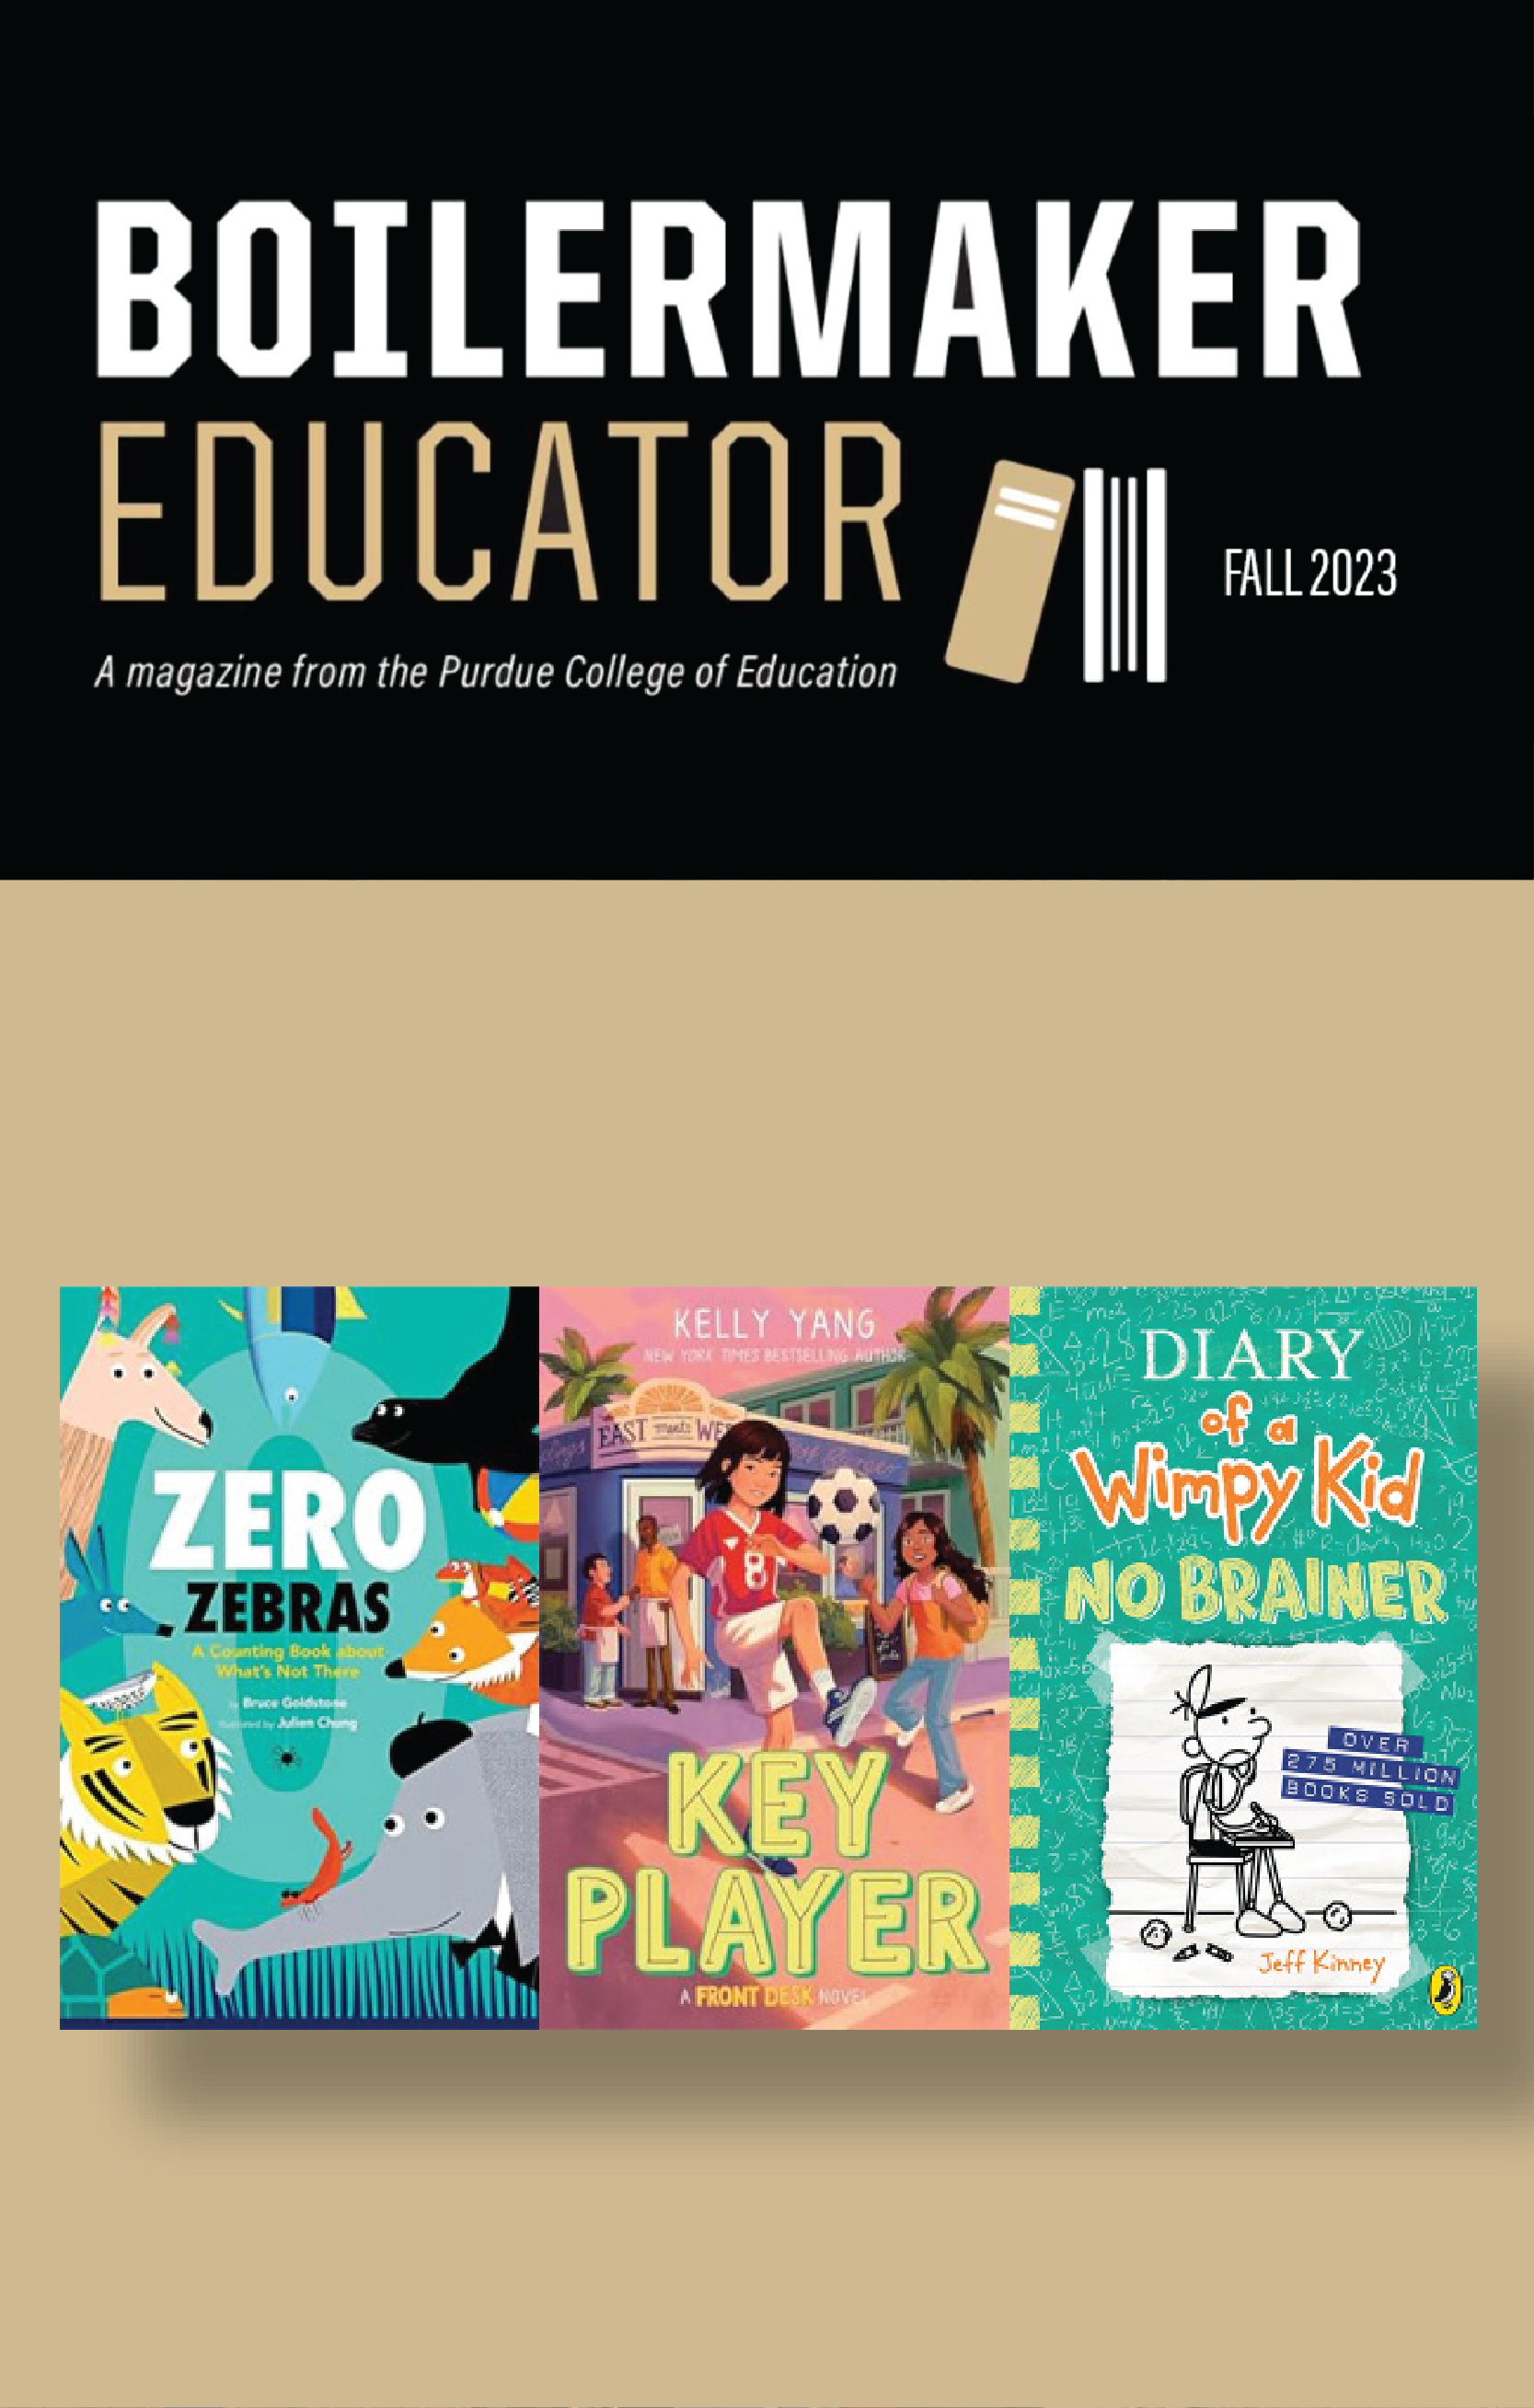 Boilermaker Educator Fall 2023: A magazine from the Purdue College of Education